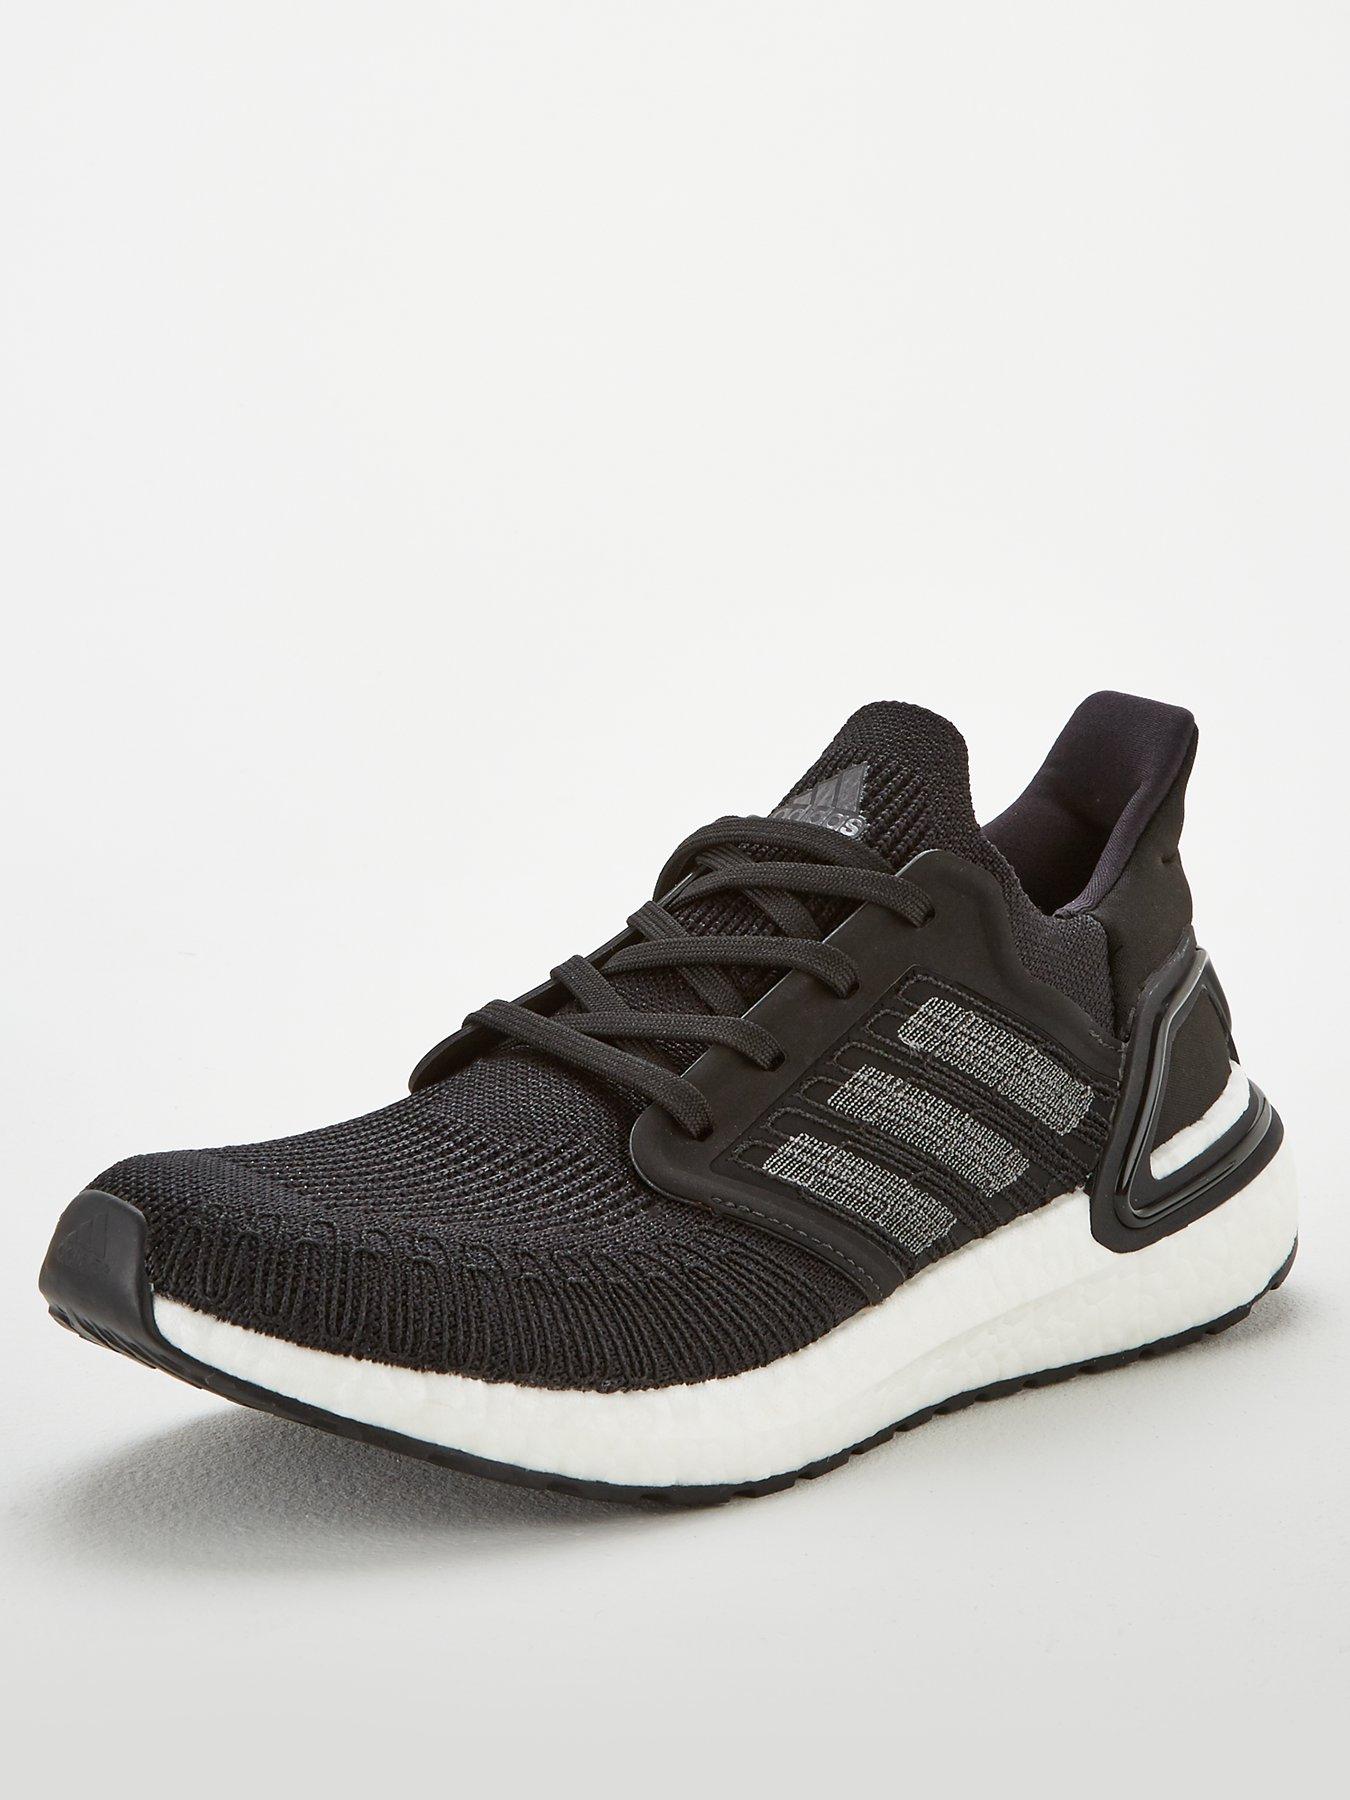 adidas ultra boost trainers